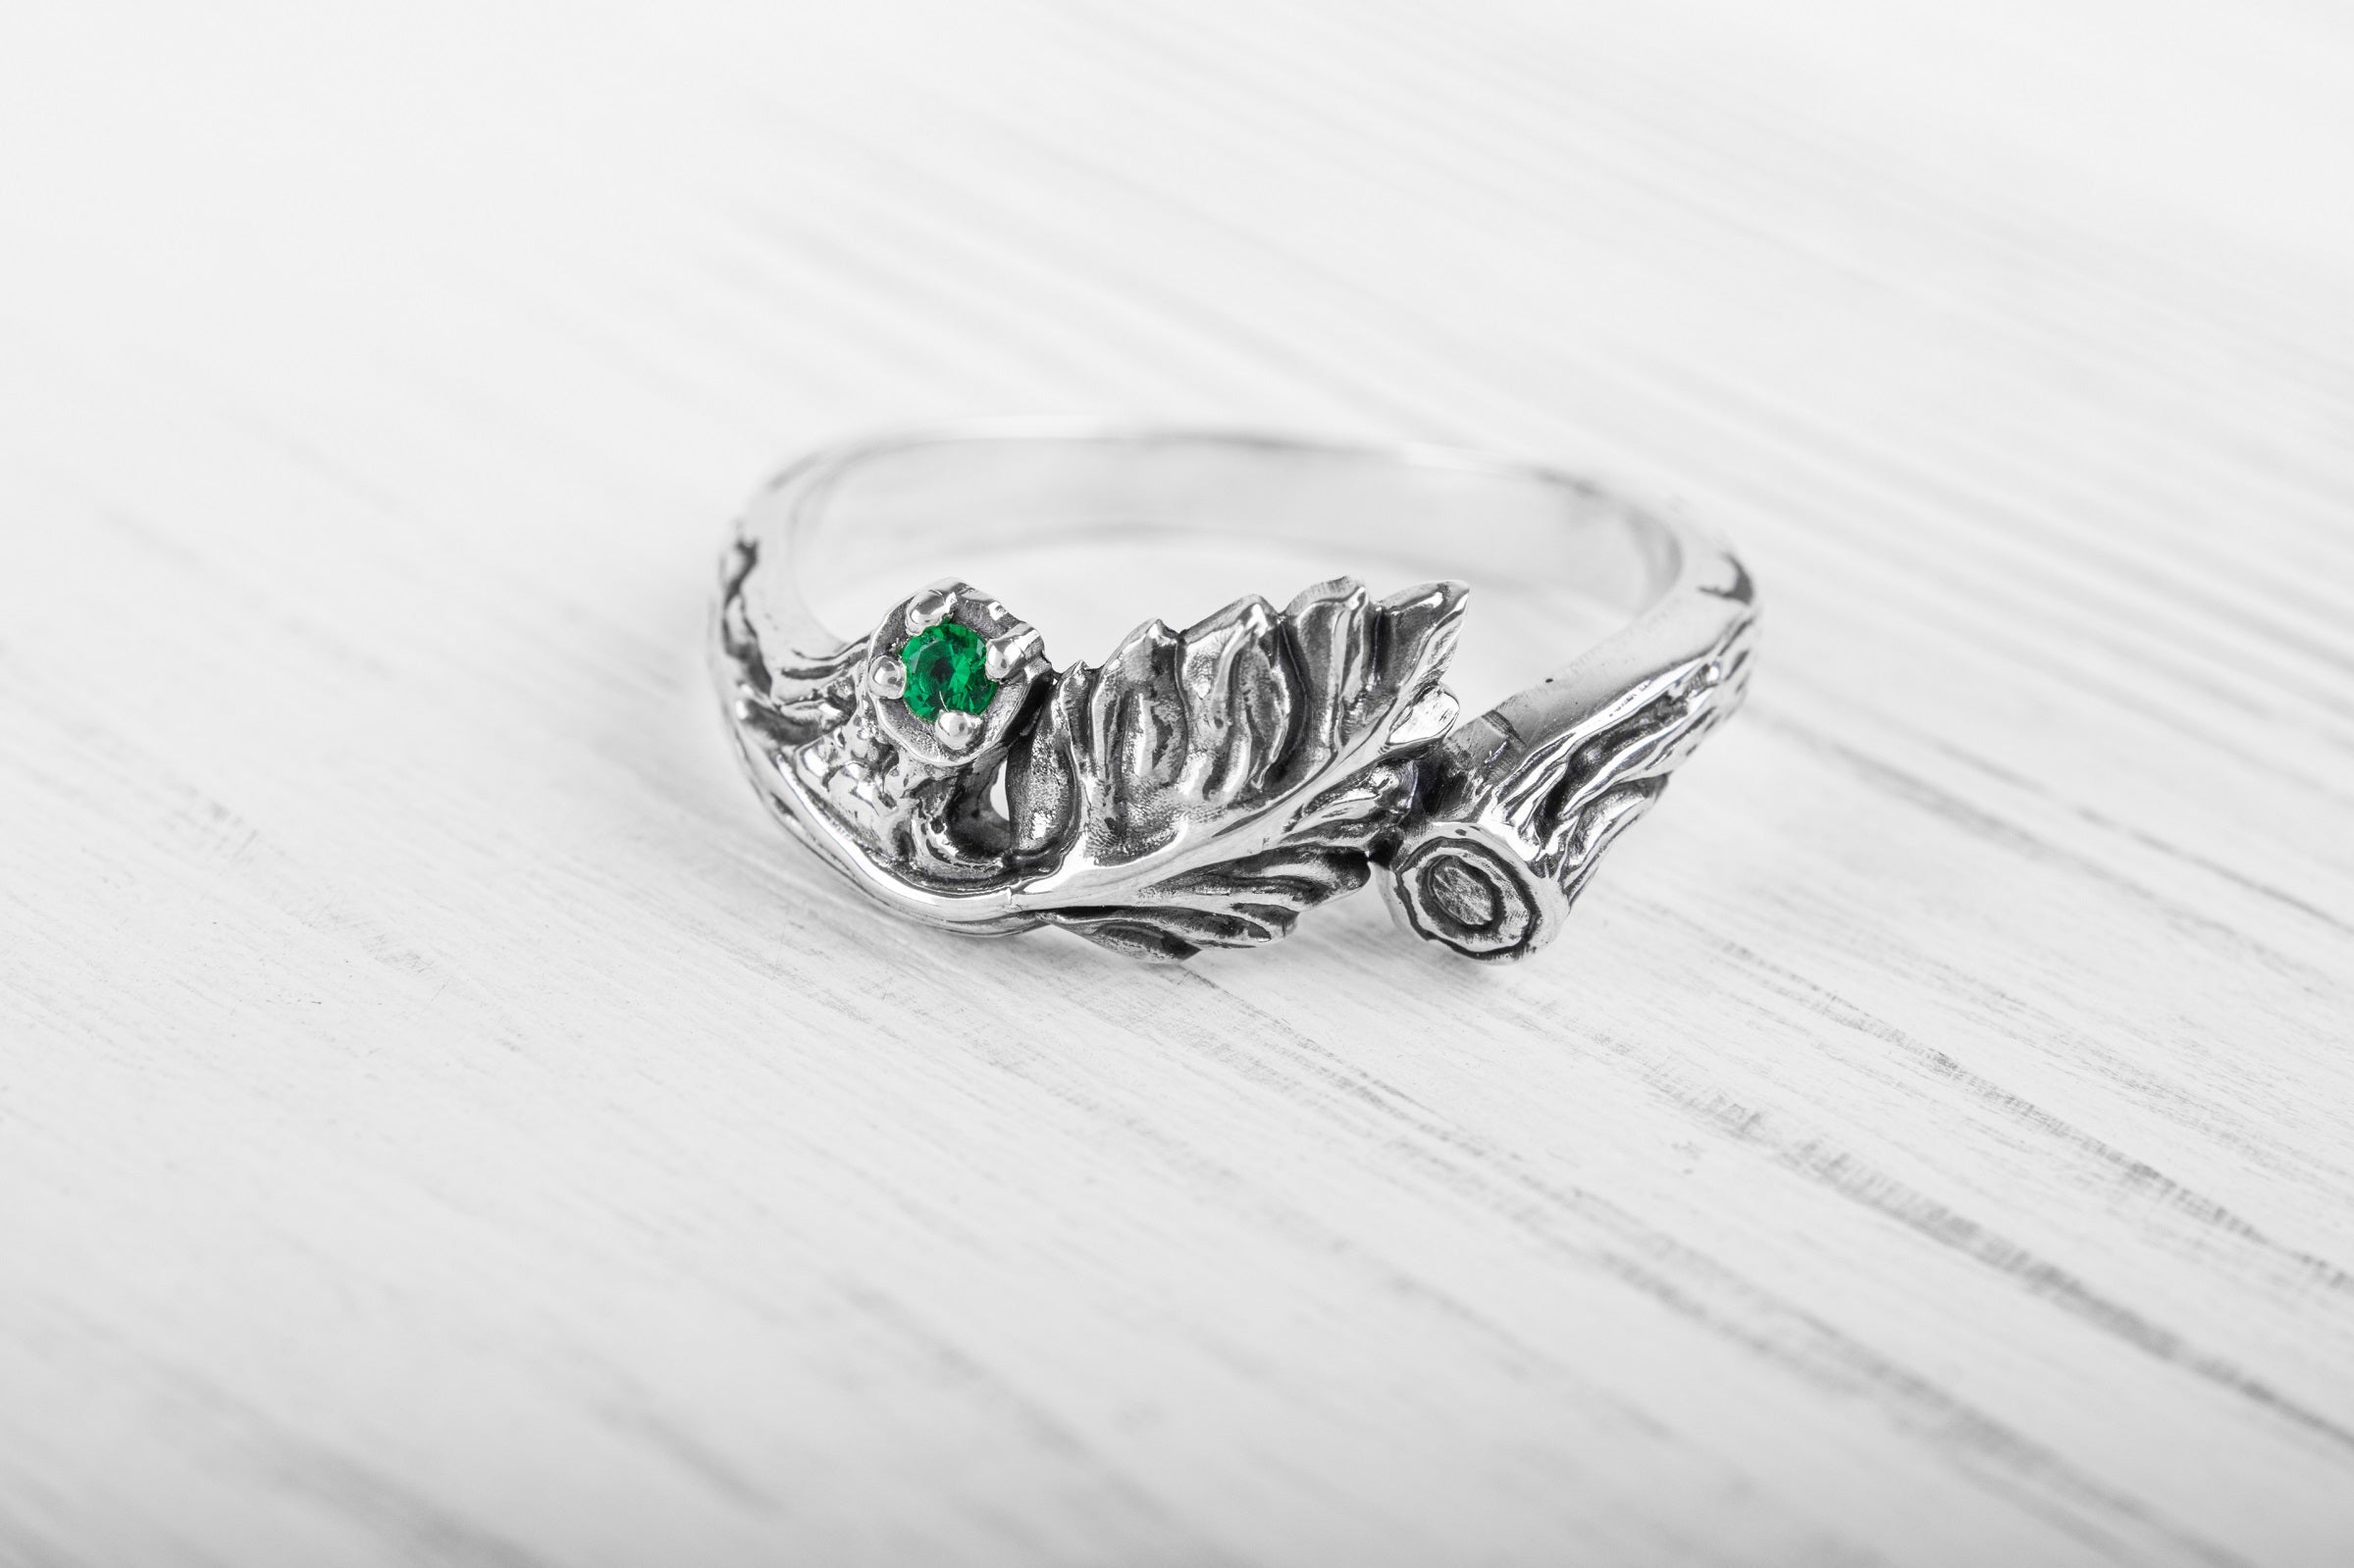 Sterling Silver Branch Ring with Leaves and Green Gem, Unique handmade Jewelry - vikingworkshop